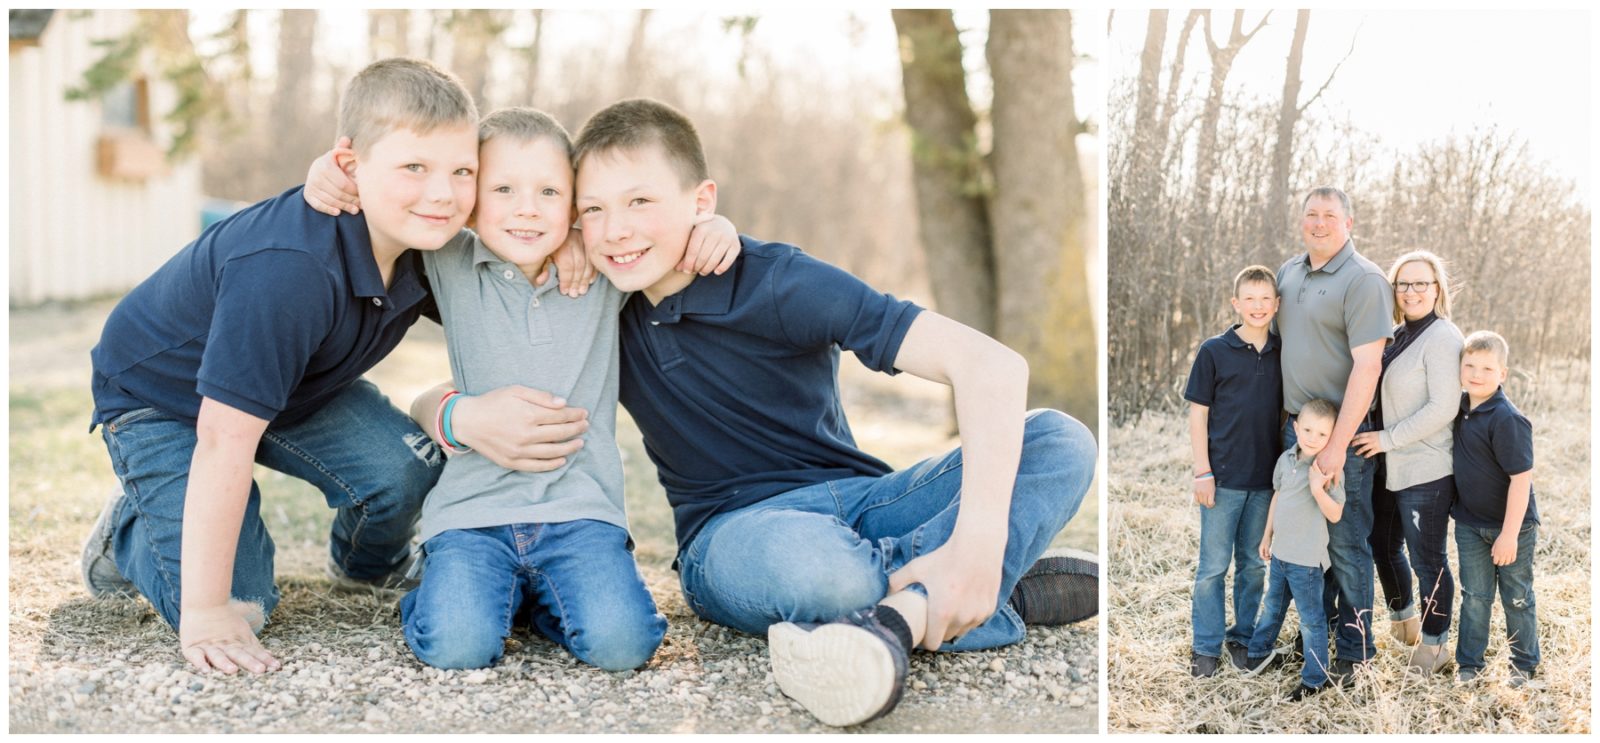 A family photo session in Milan MN